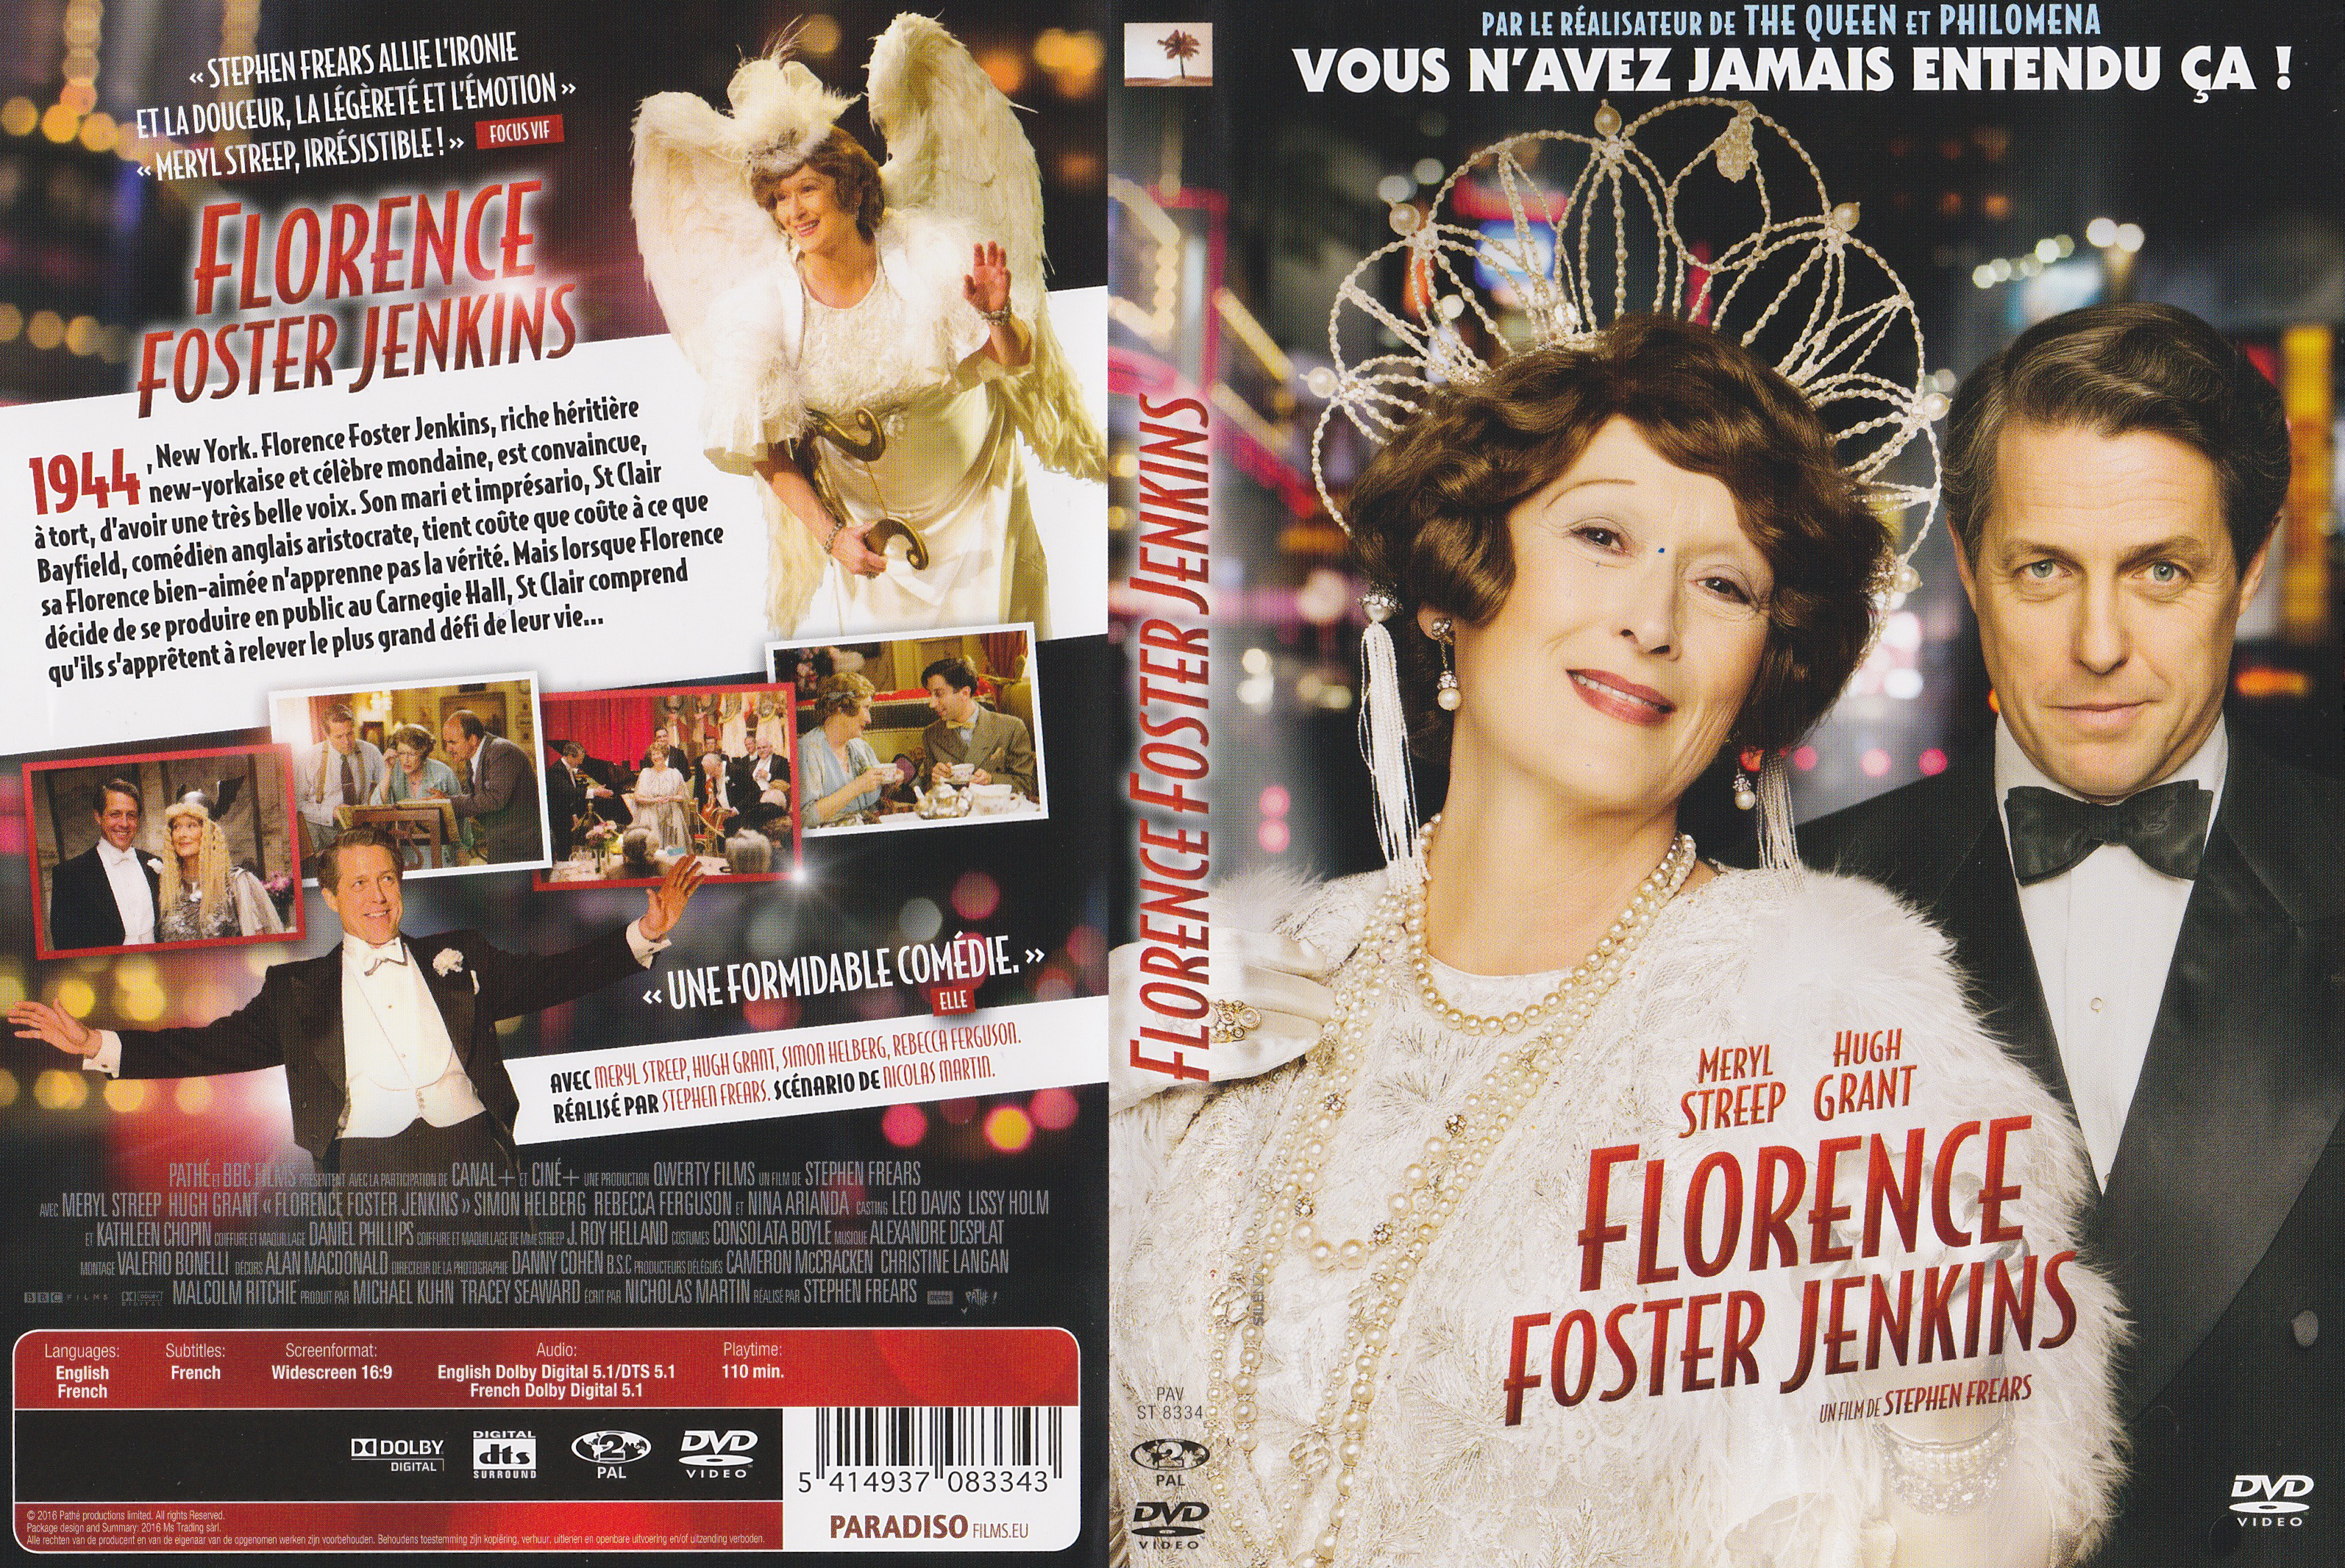 Jaquette DVD Florence Foster Jenkins